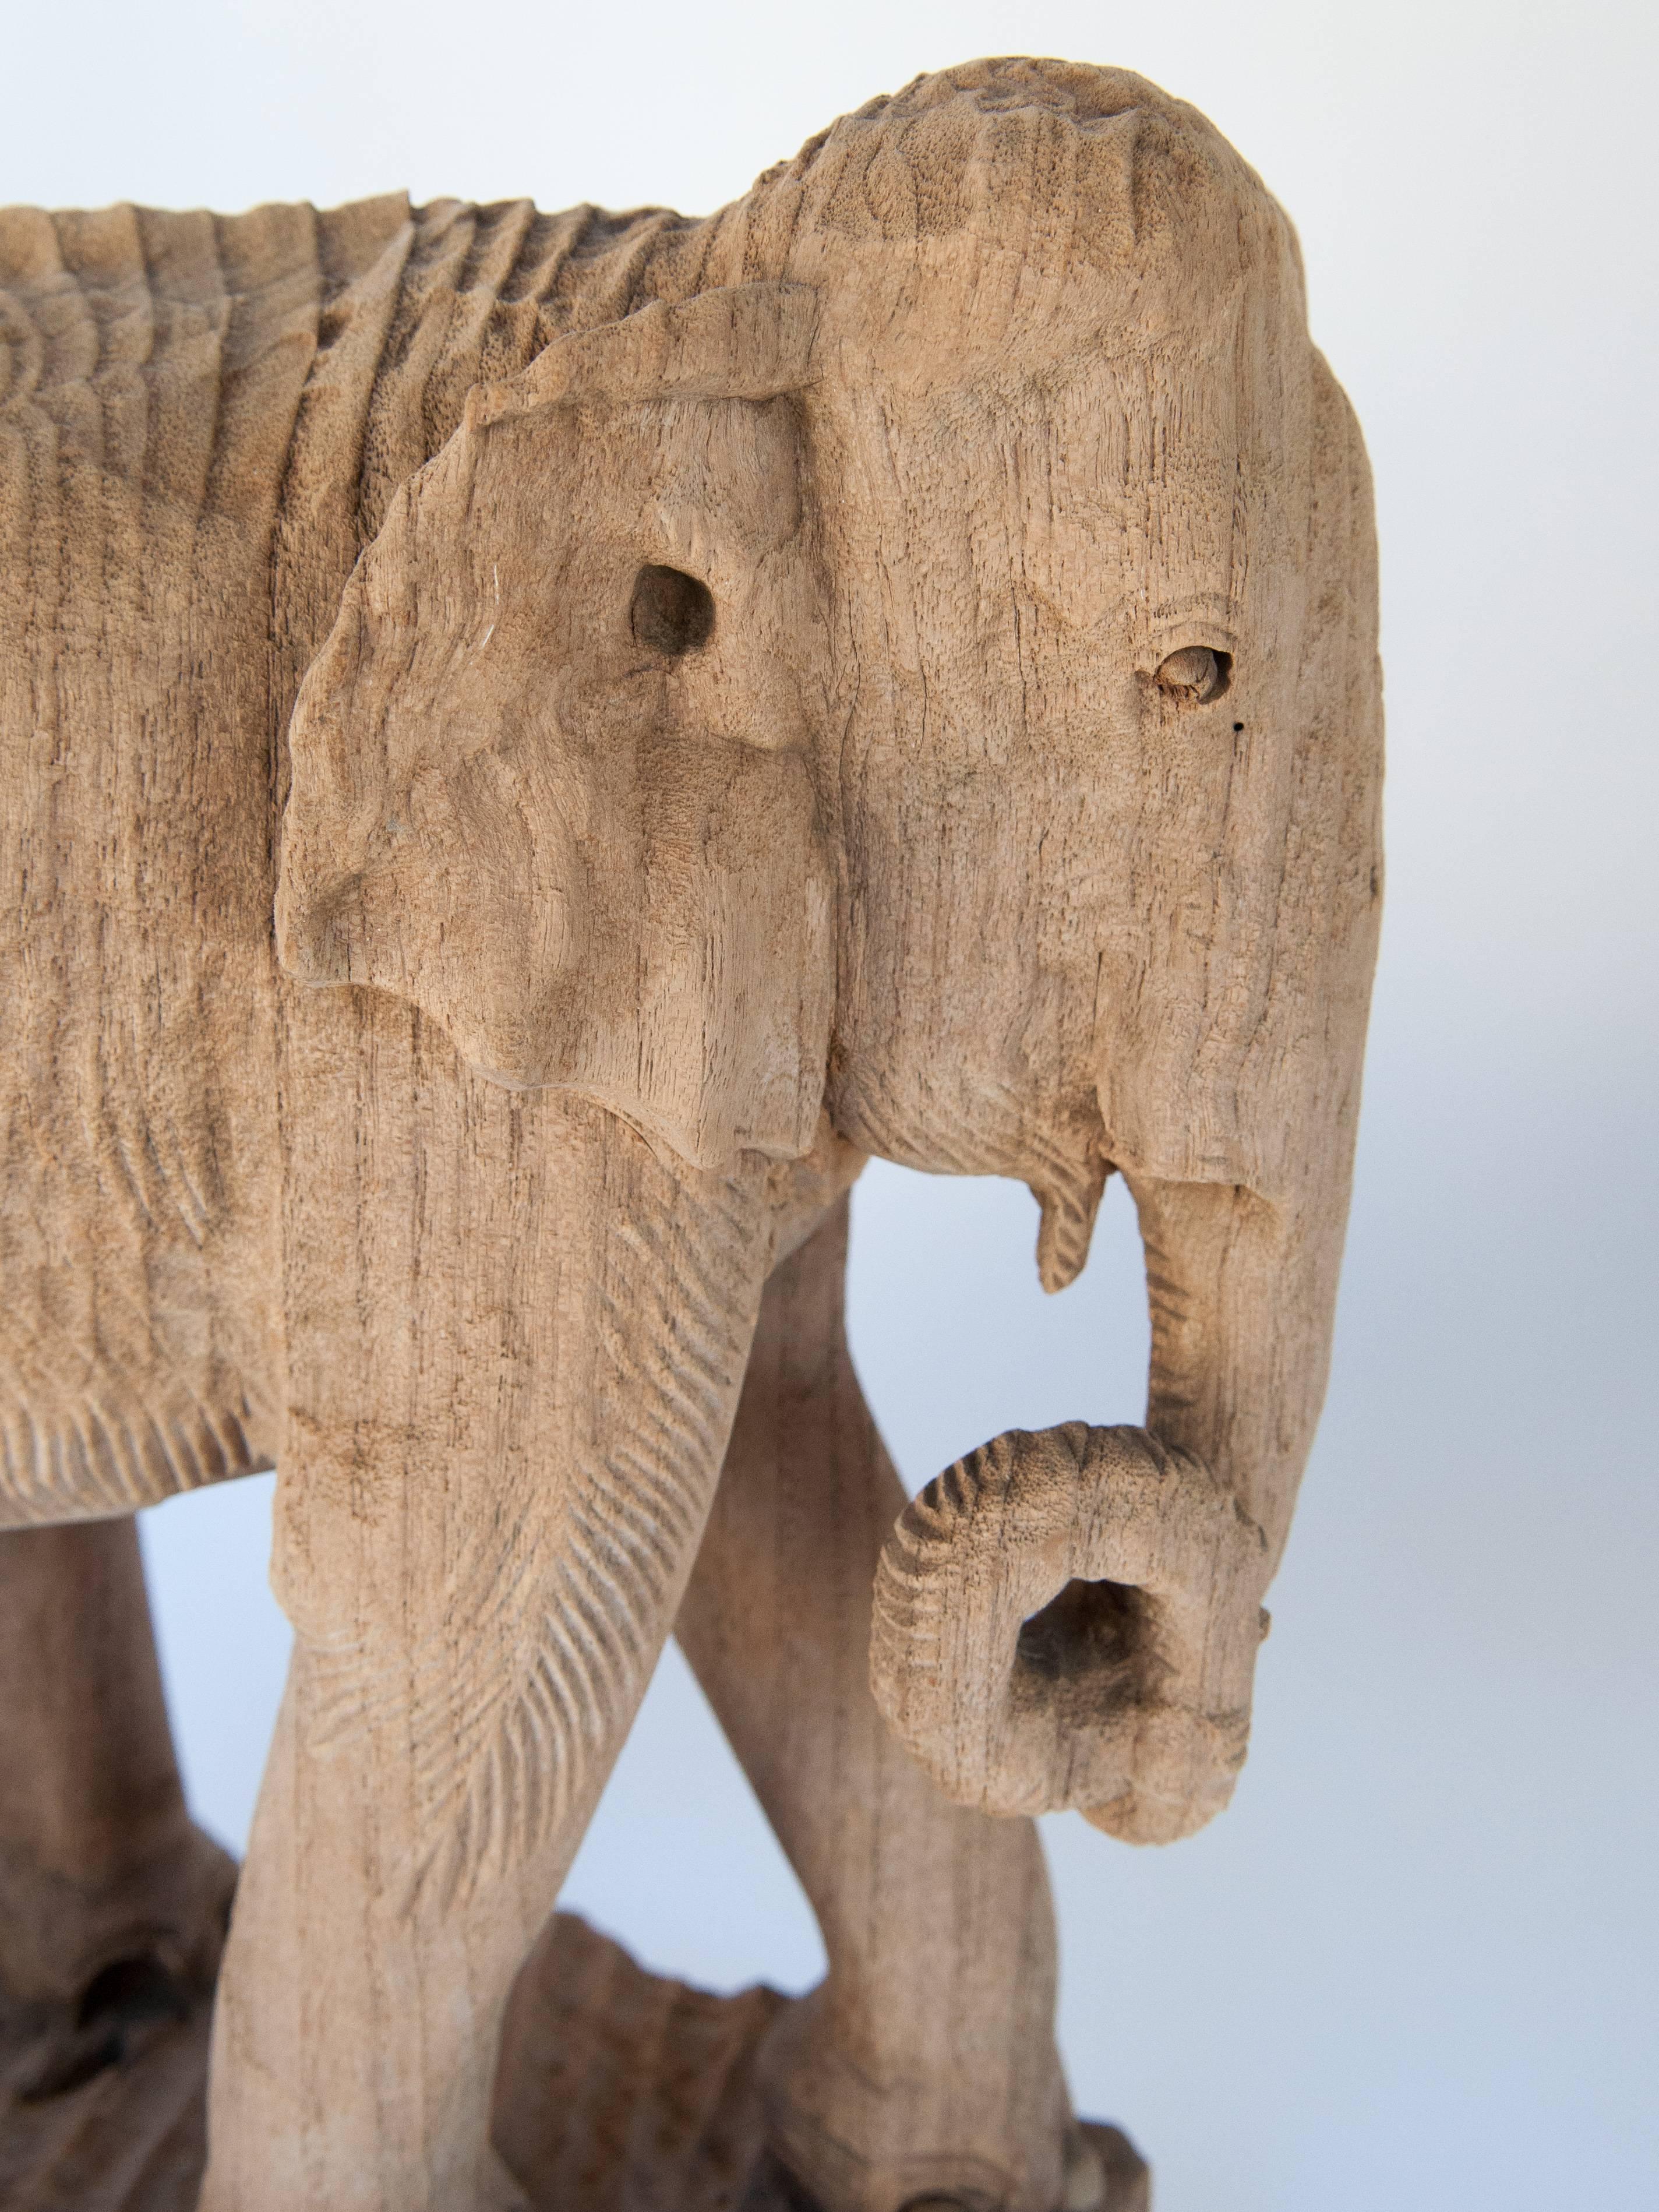 Eroded hand-carved elephant, teak wood, late 20th century, Northern, Thailand.
Offered by Bruce Hughes.
The weathered surface of this gracefully eroded hand carved teak wood elephant from Northern Thailand resulted from many years of exposure to